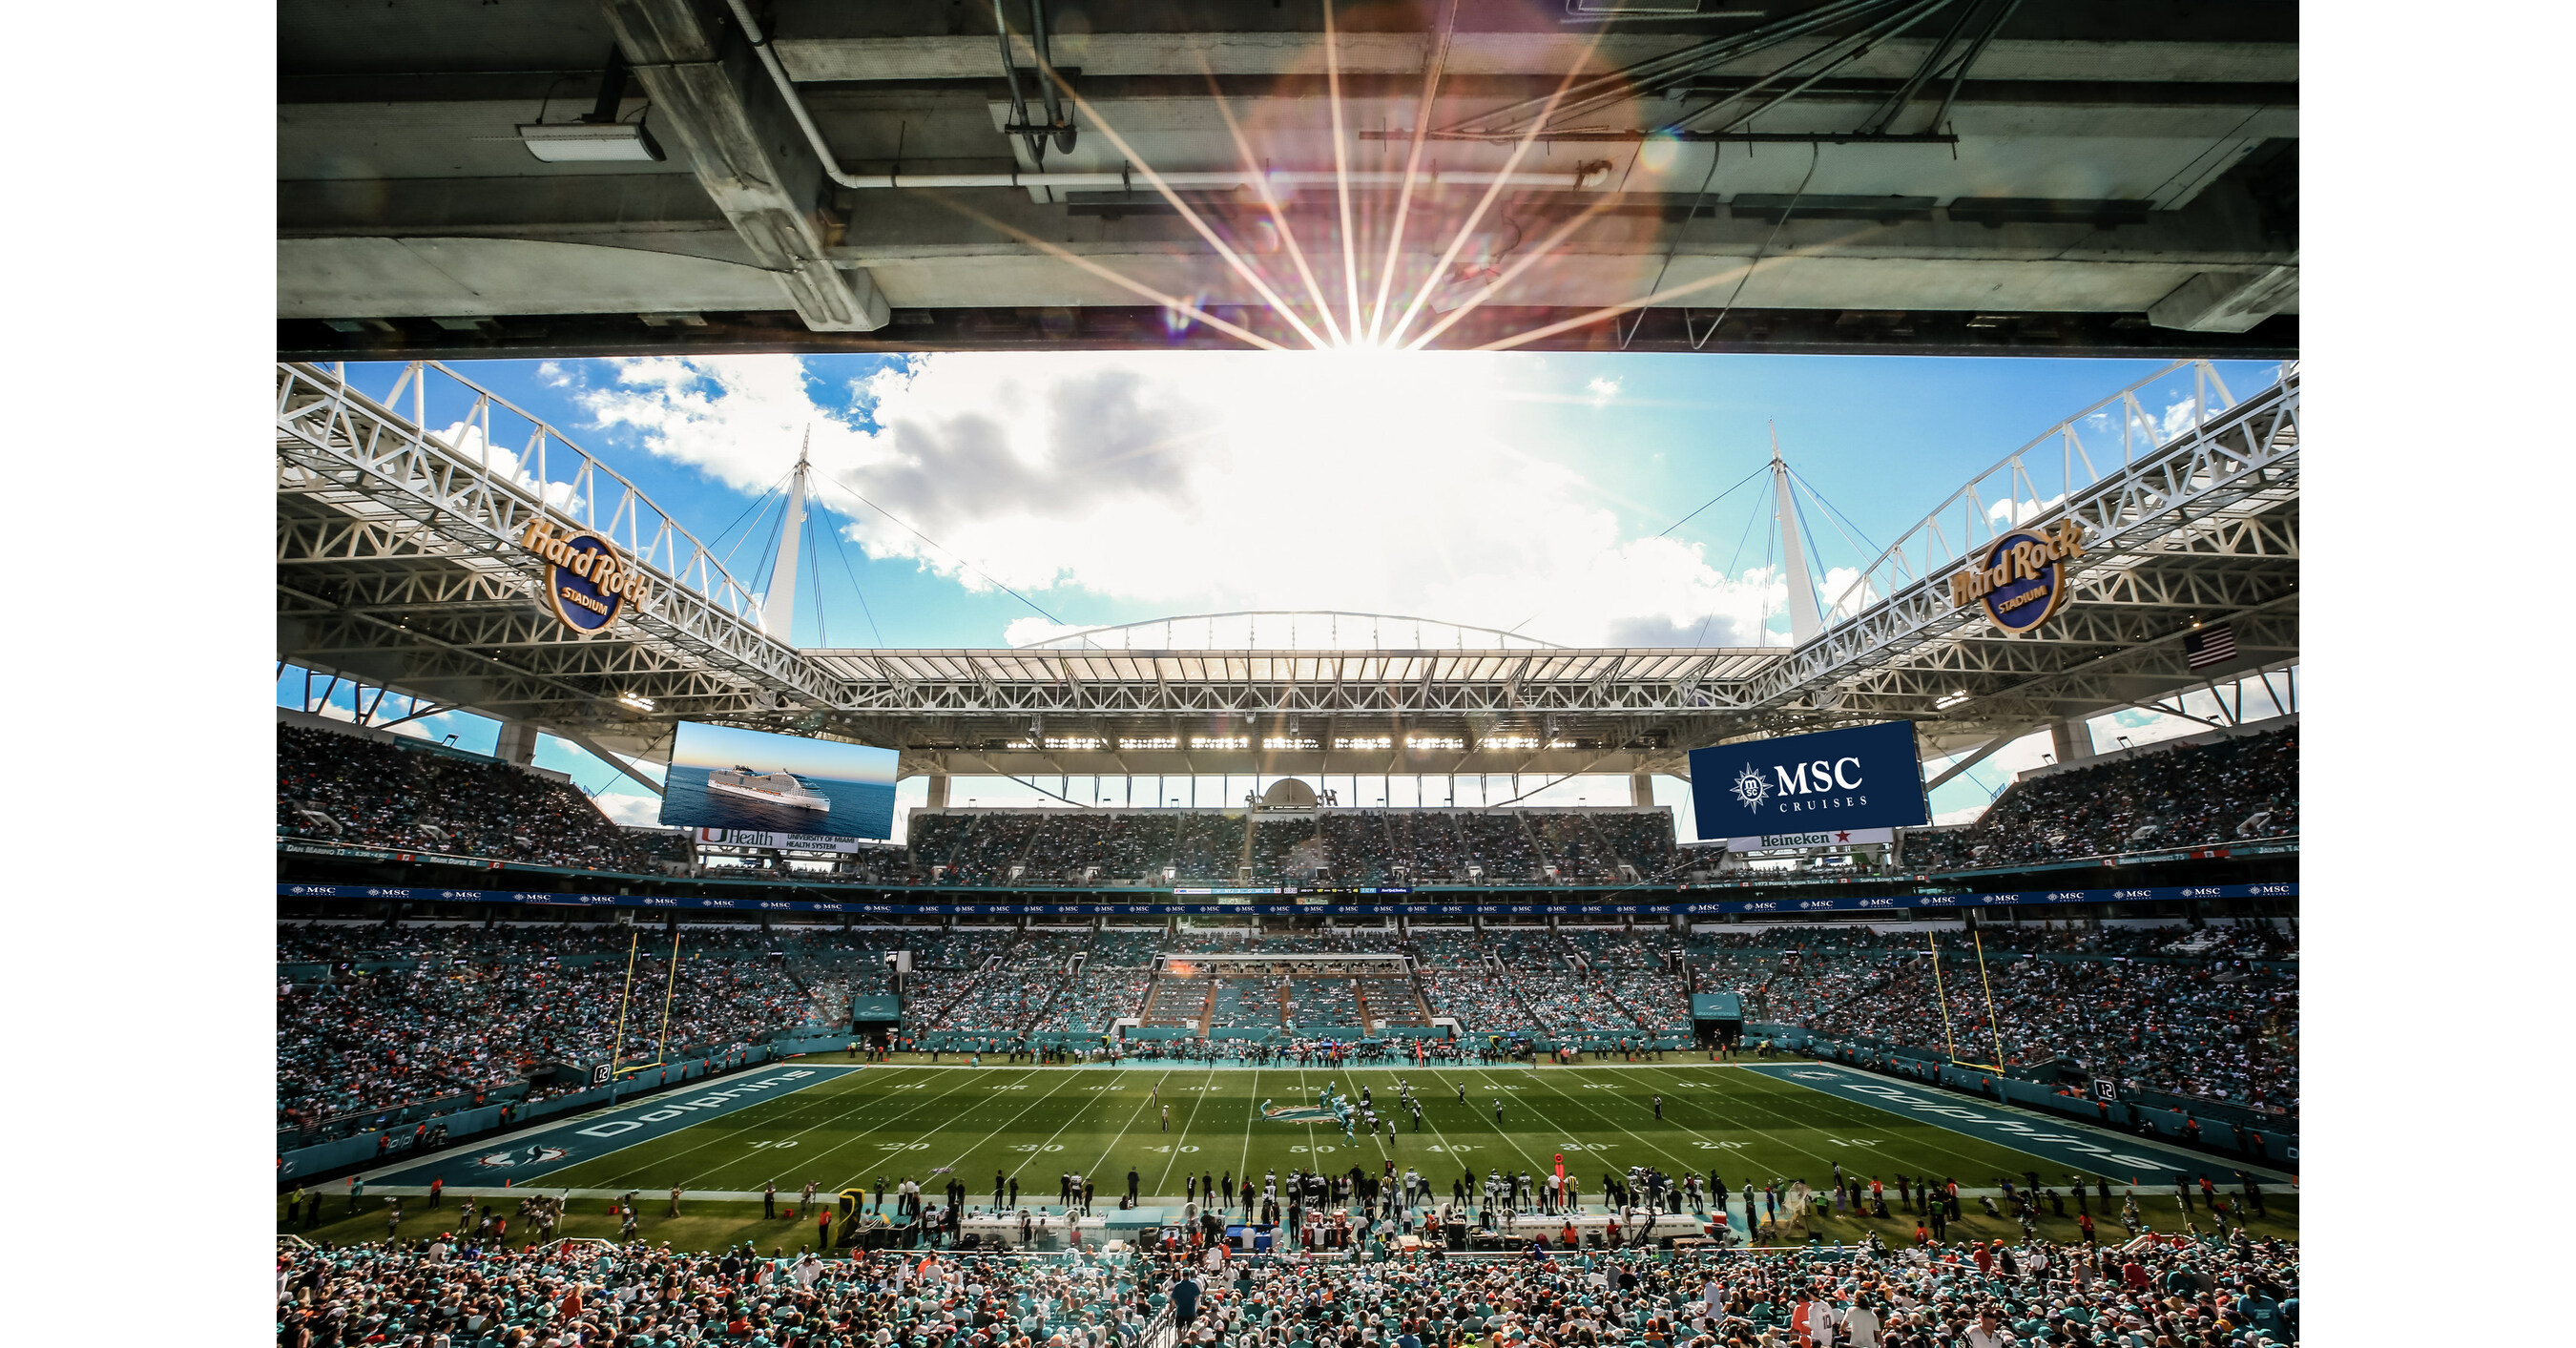 MSC CRUISES ANNOUNCES NEW MULTIYEAR PARTNERSHIP WITH MIAMI DOLPHINS